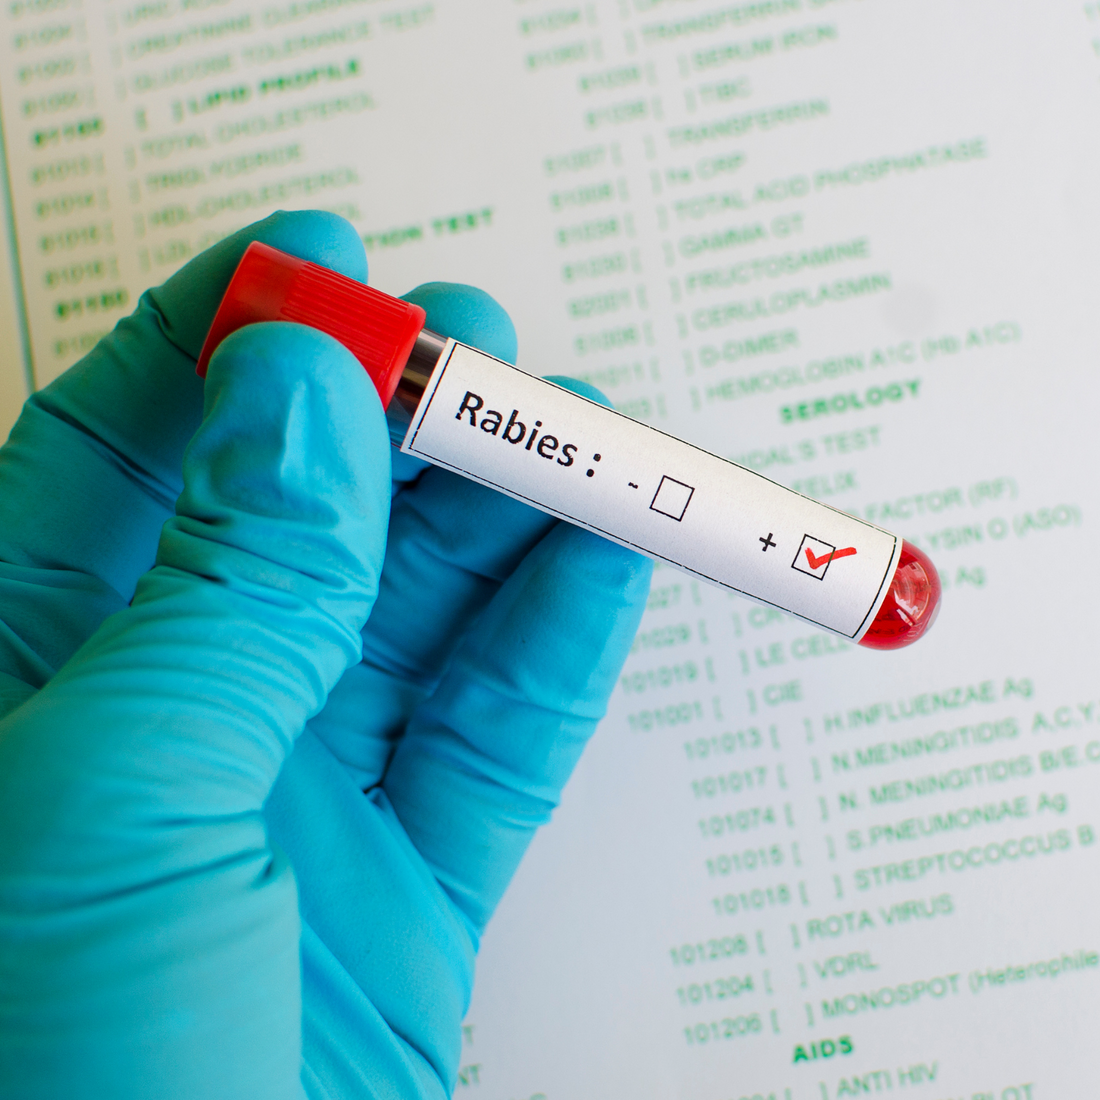 What You Need To Know About Rabies